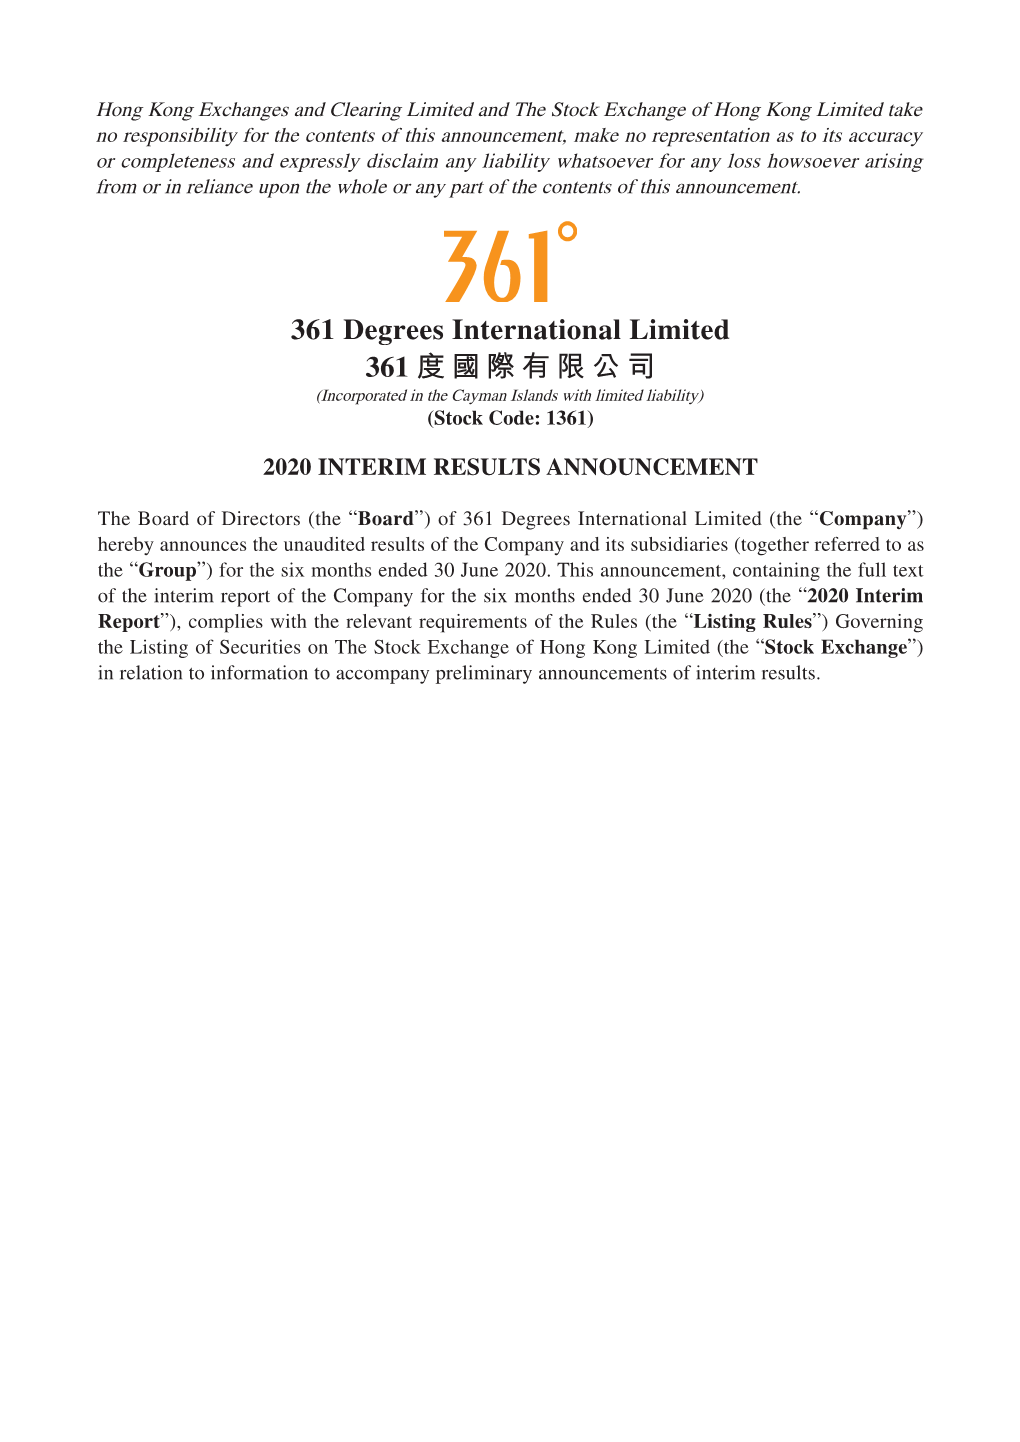 361 Degrees International Limited 361 度國際有限公司 (Incorporated in the Cayman Islands with Limited Liability) (Stock Code: 1361)